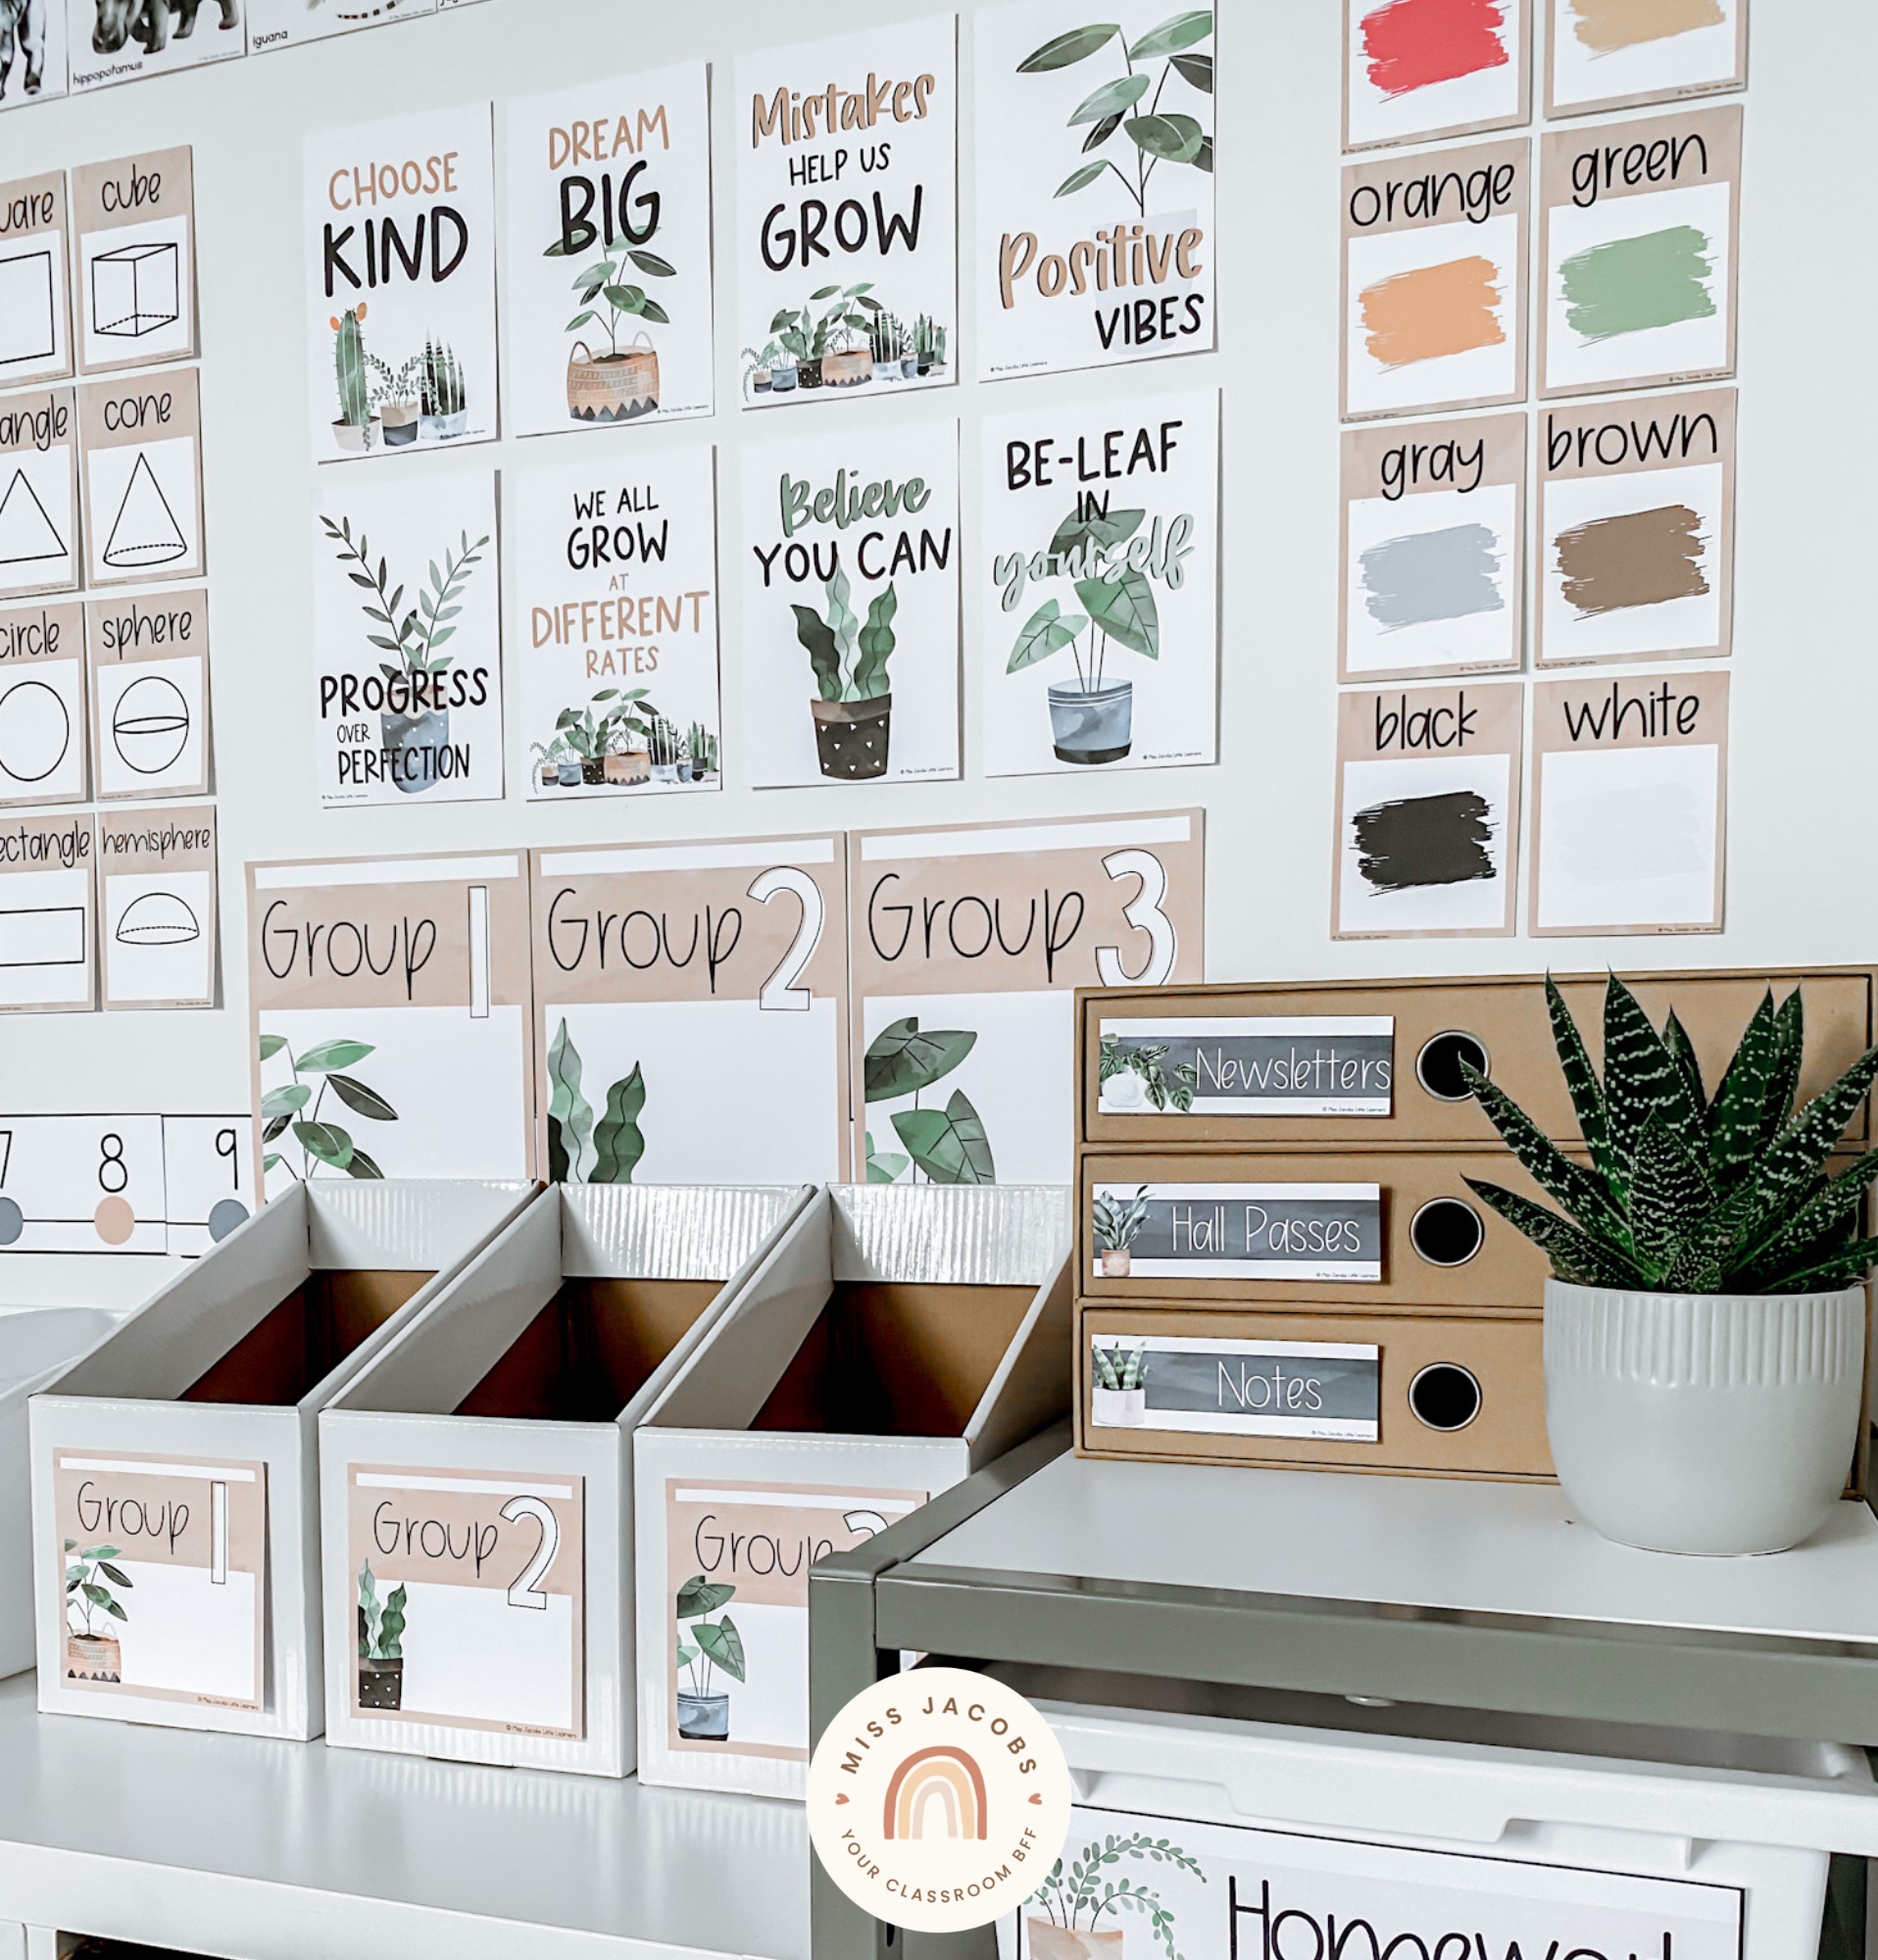 Two images show a wide range of the new Boho Plants decor products. The left images shows a shelving unit with magazine boxes on top and a small set of mini drawers colloquially called a ‘teachers toolbox.’ Then to the side is a taller series of draws on a trolley. The wall shows alphabet posters and a number of calendar displays. The tones are all earthy with nudes, white, greens, blues and pops of orange. The right image is a closer angle and shows a series of motivational posters, and posters showing different colours.